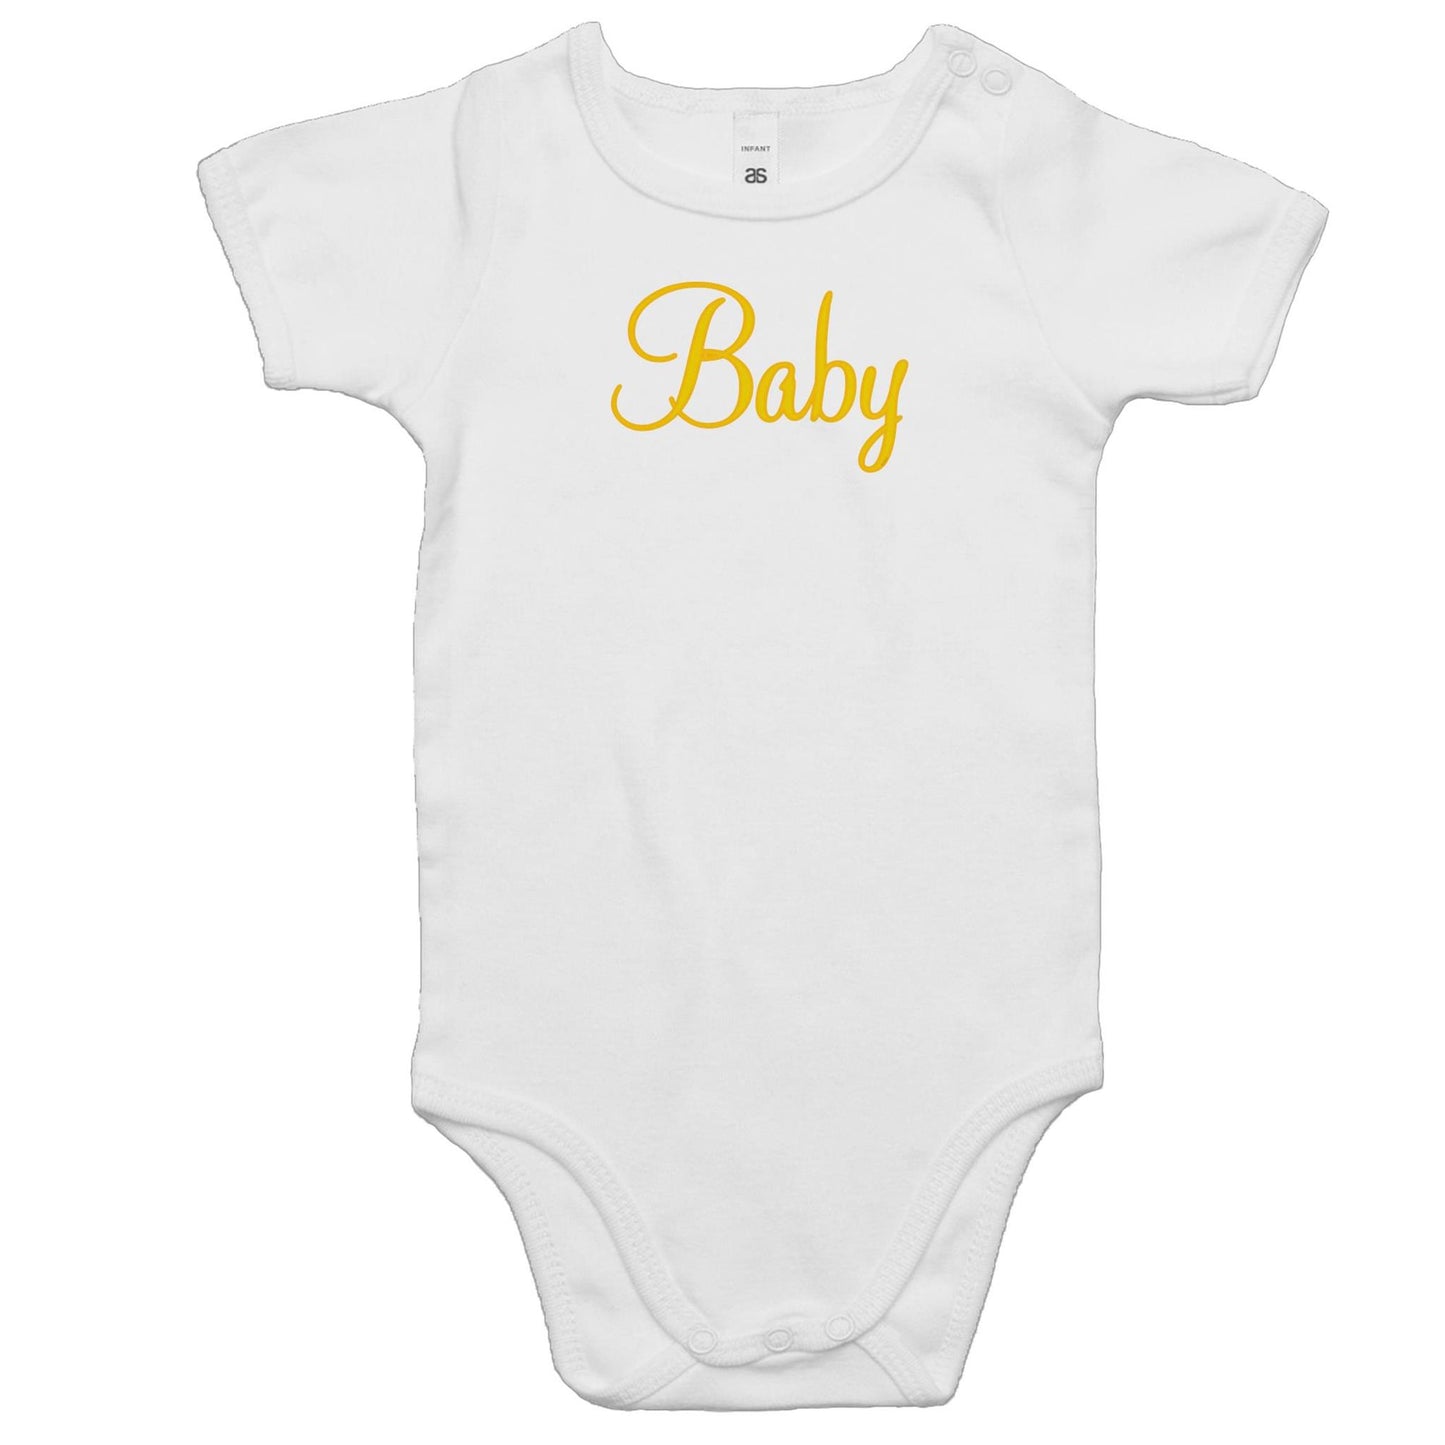 Baby Rompers for Babies